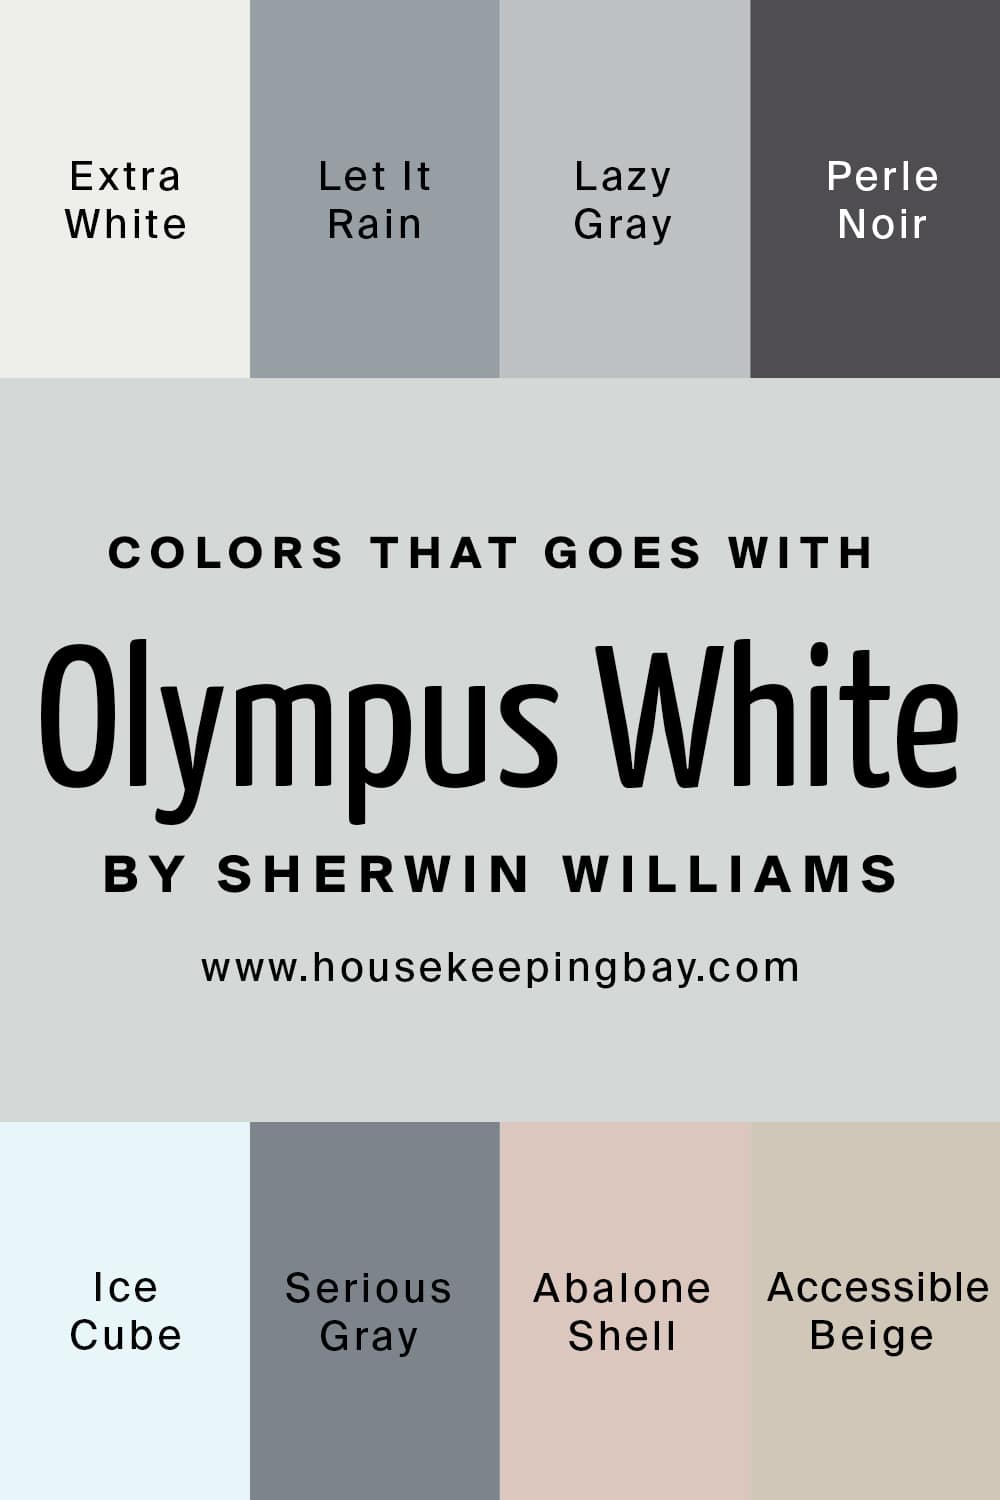 Colors that goes with Olympus White by Sherwin Williams